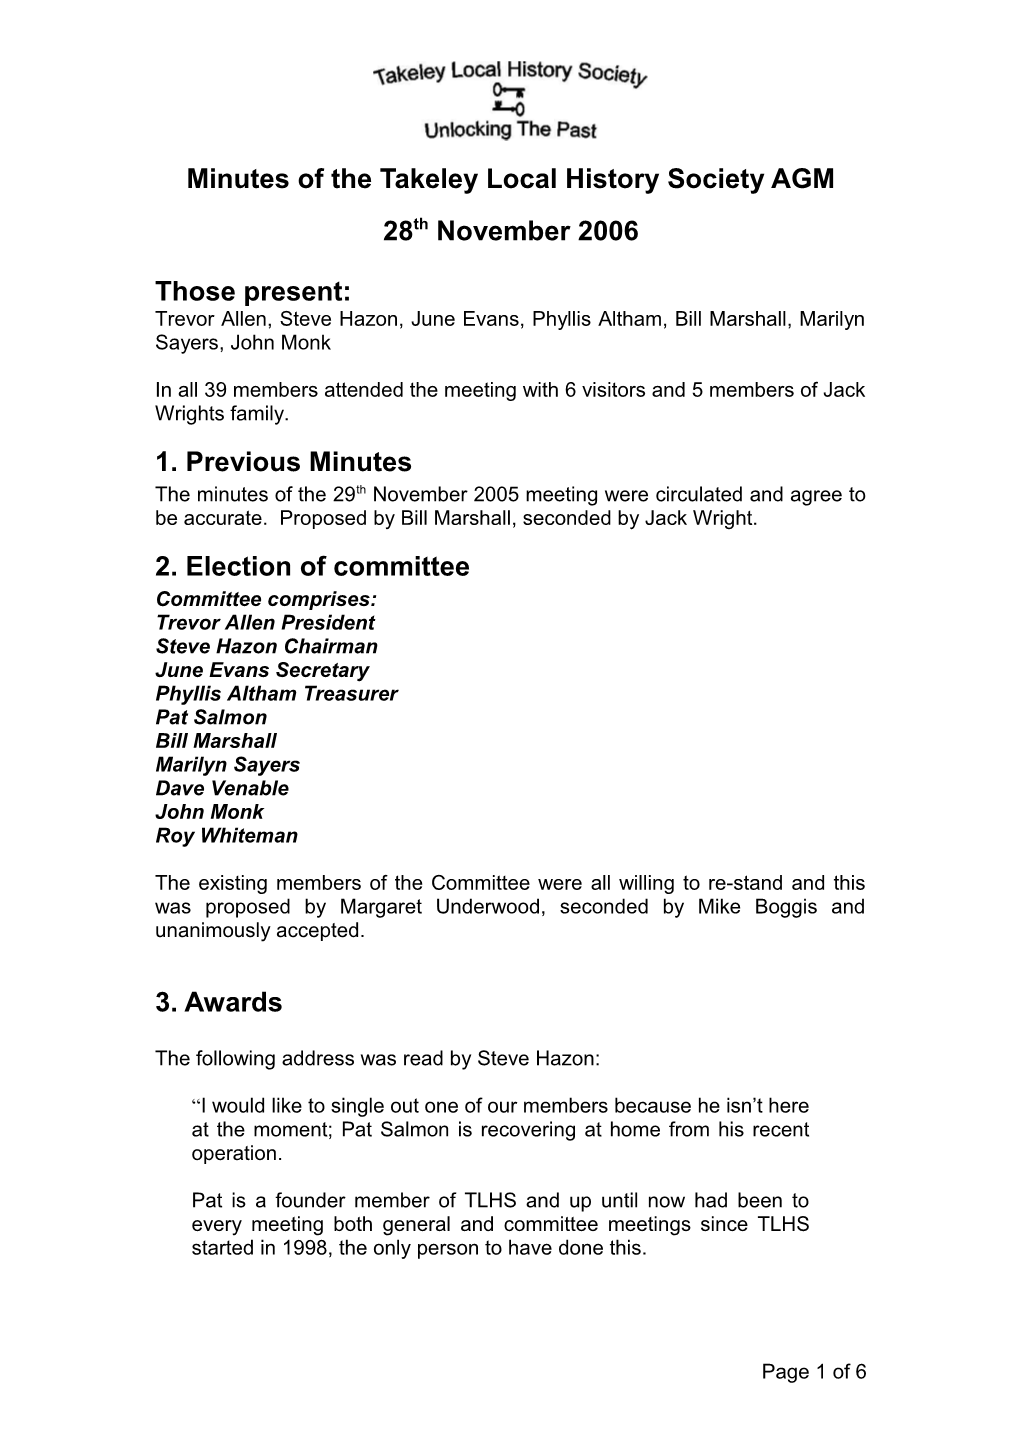 Summary for 2004 TLHS AGM